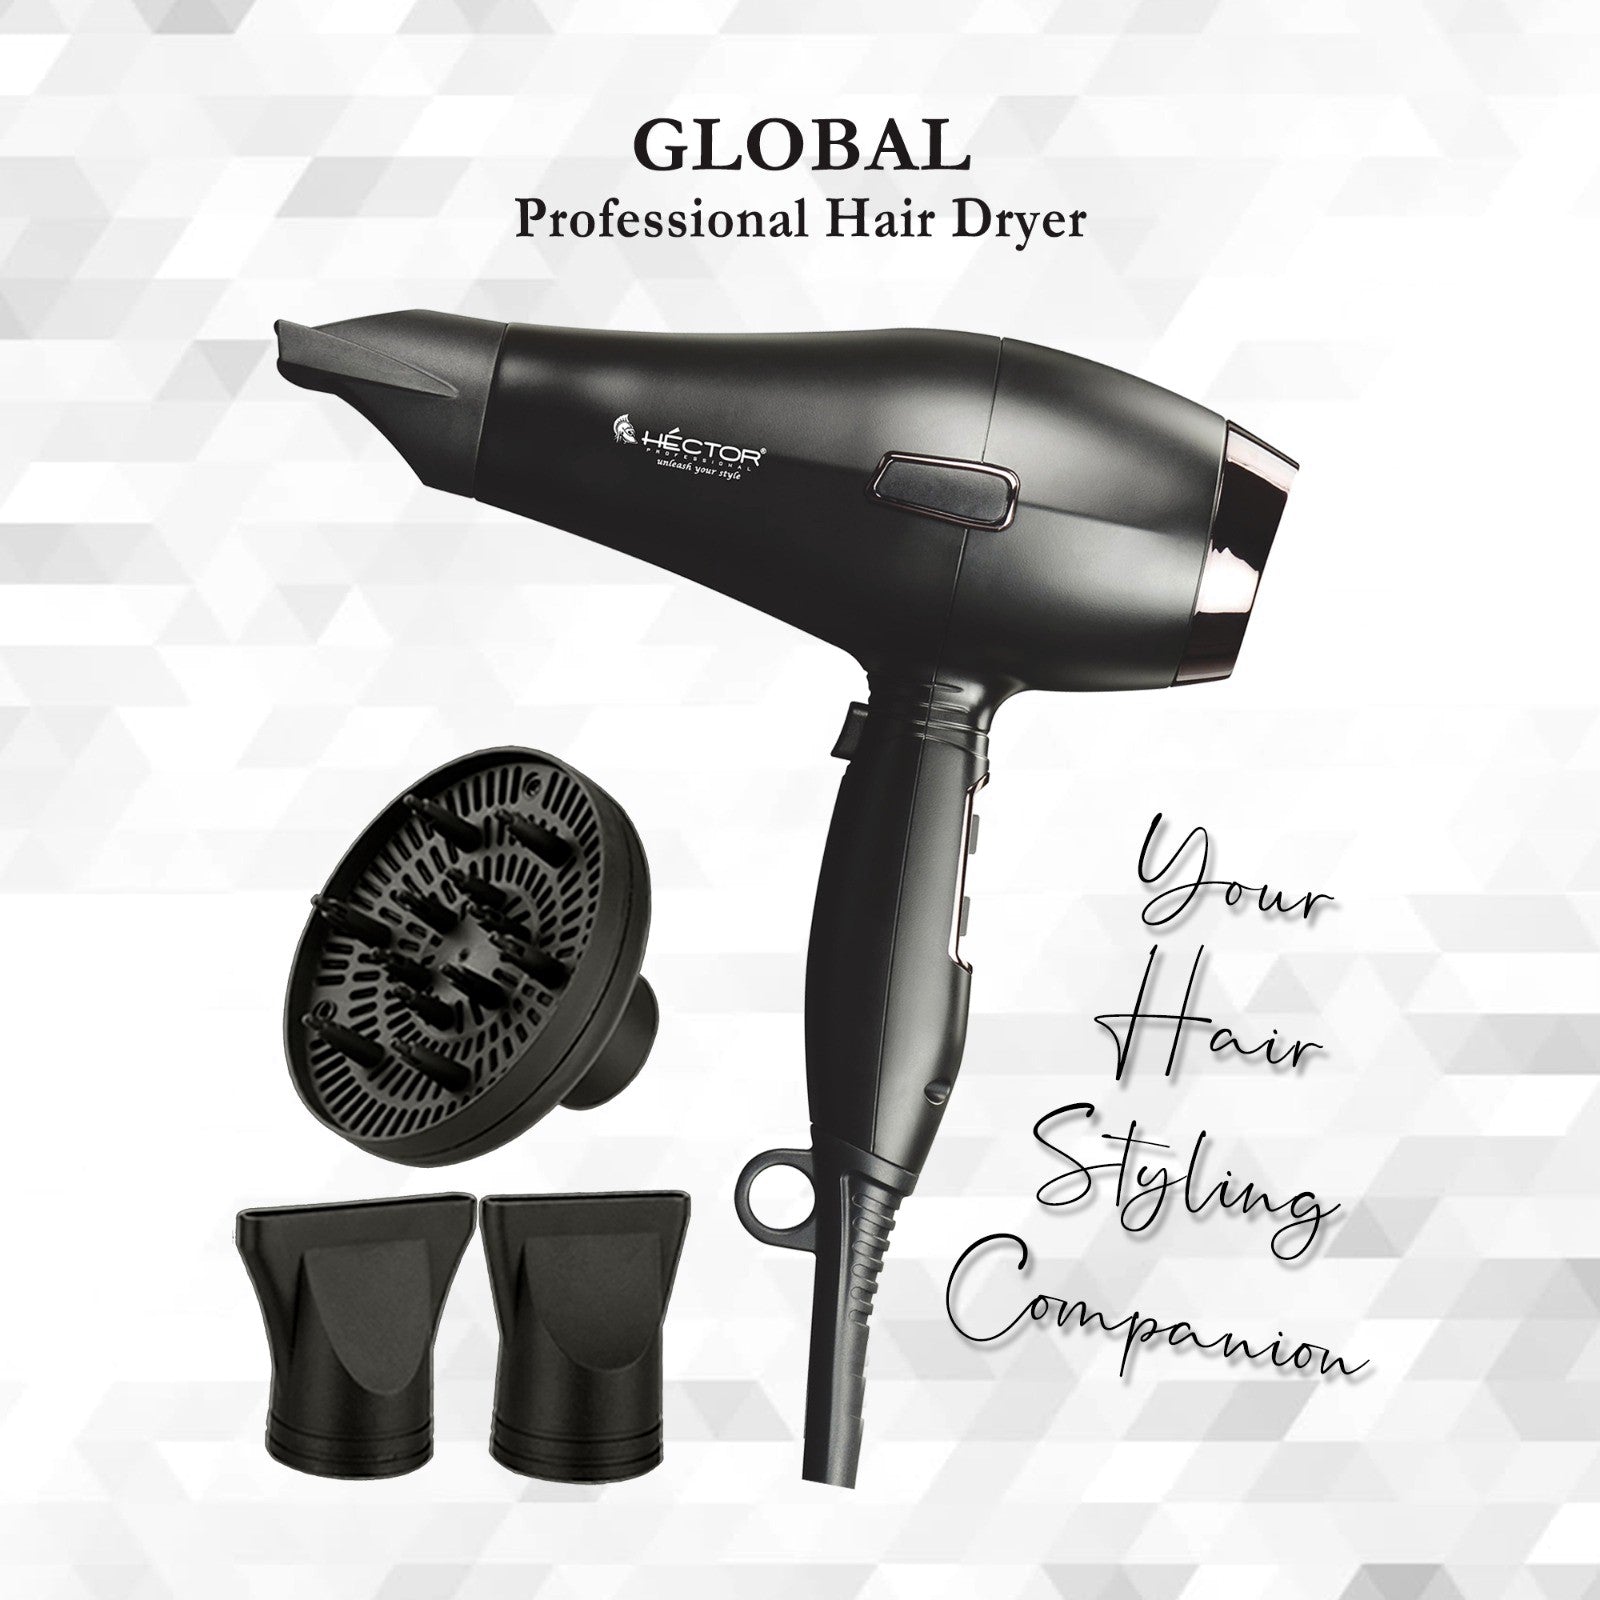 Hector Professional Global Hair Dryer- 2800w